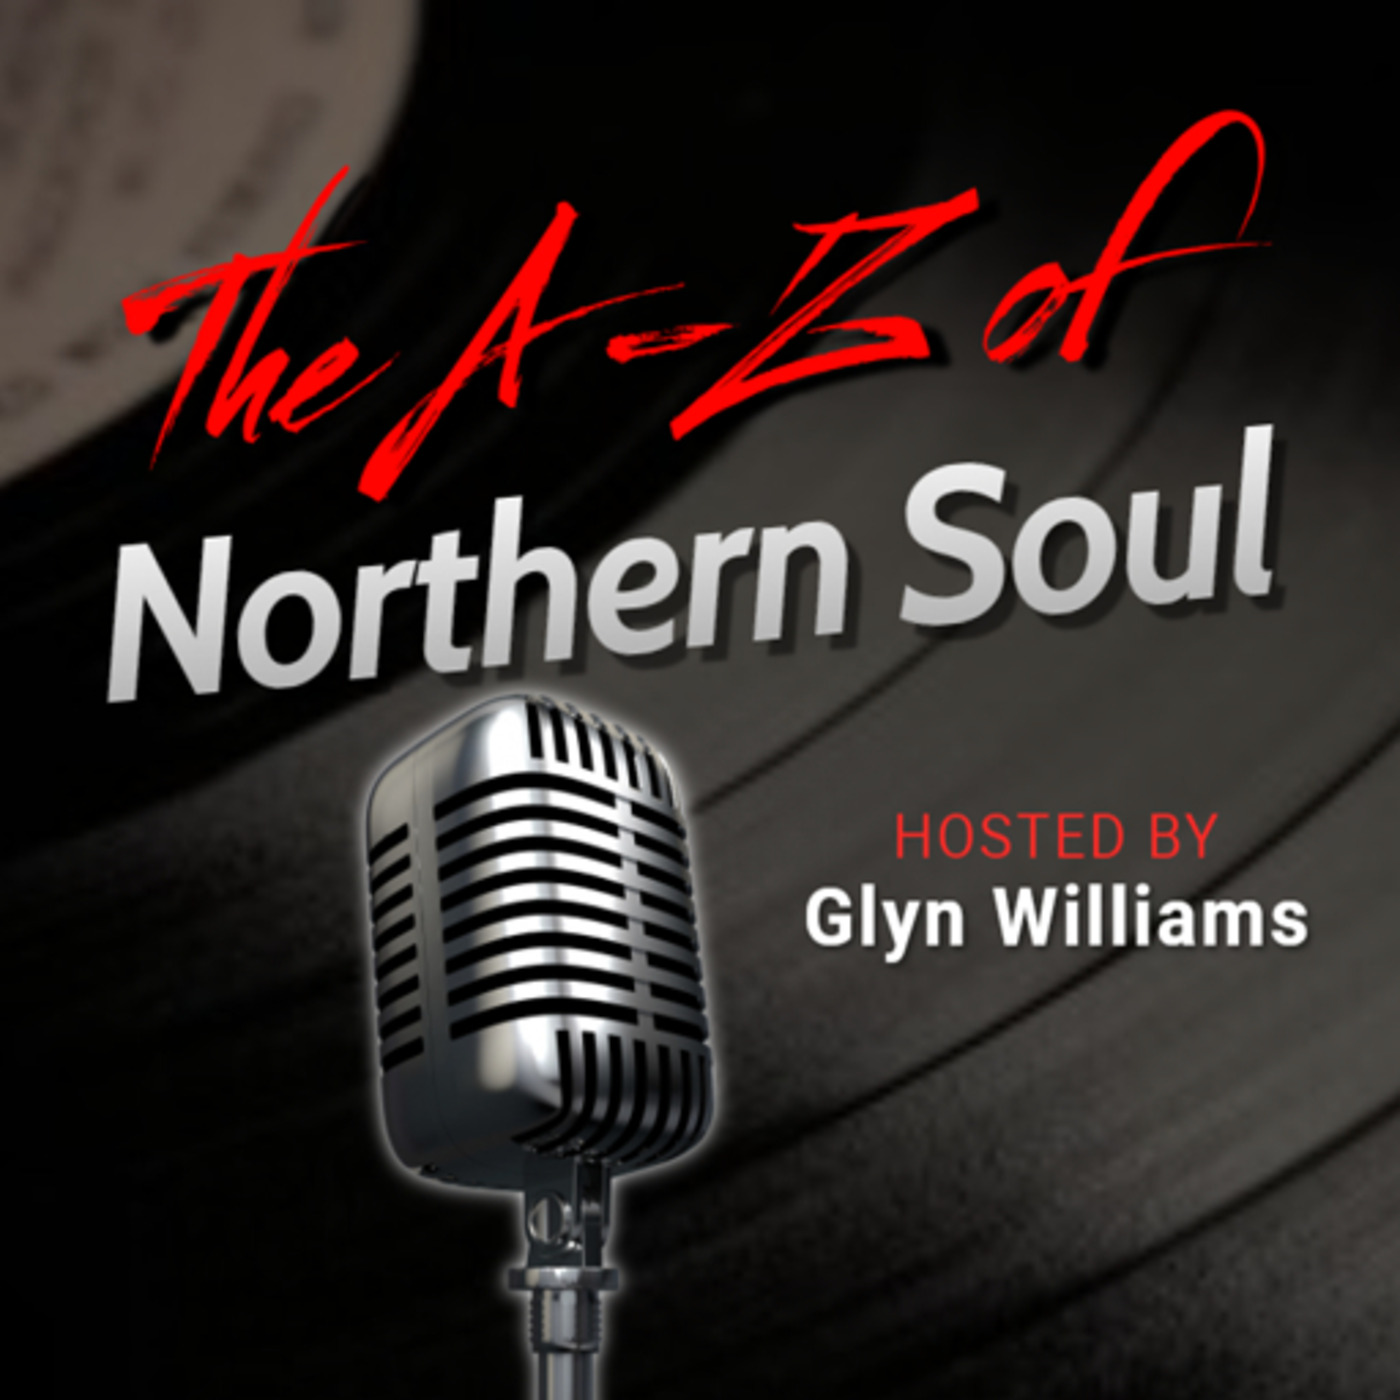 The A-Z of Northern Soul E052